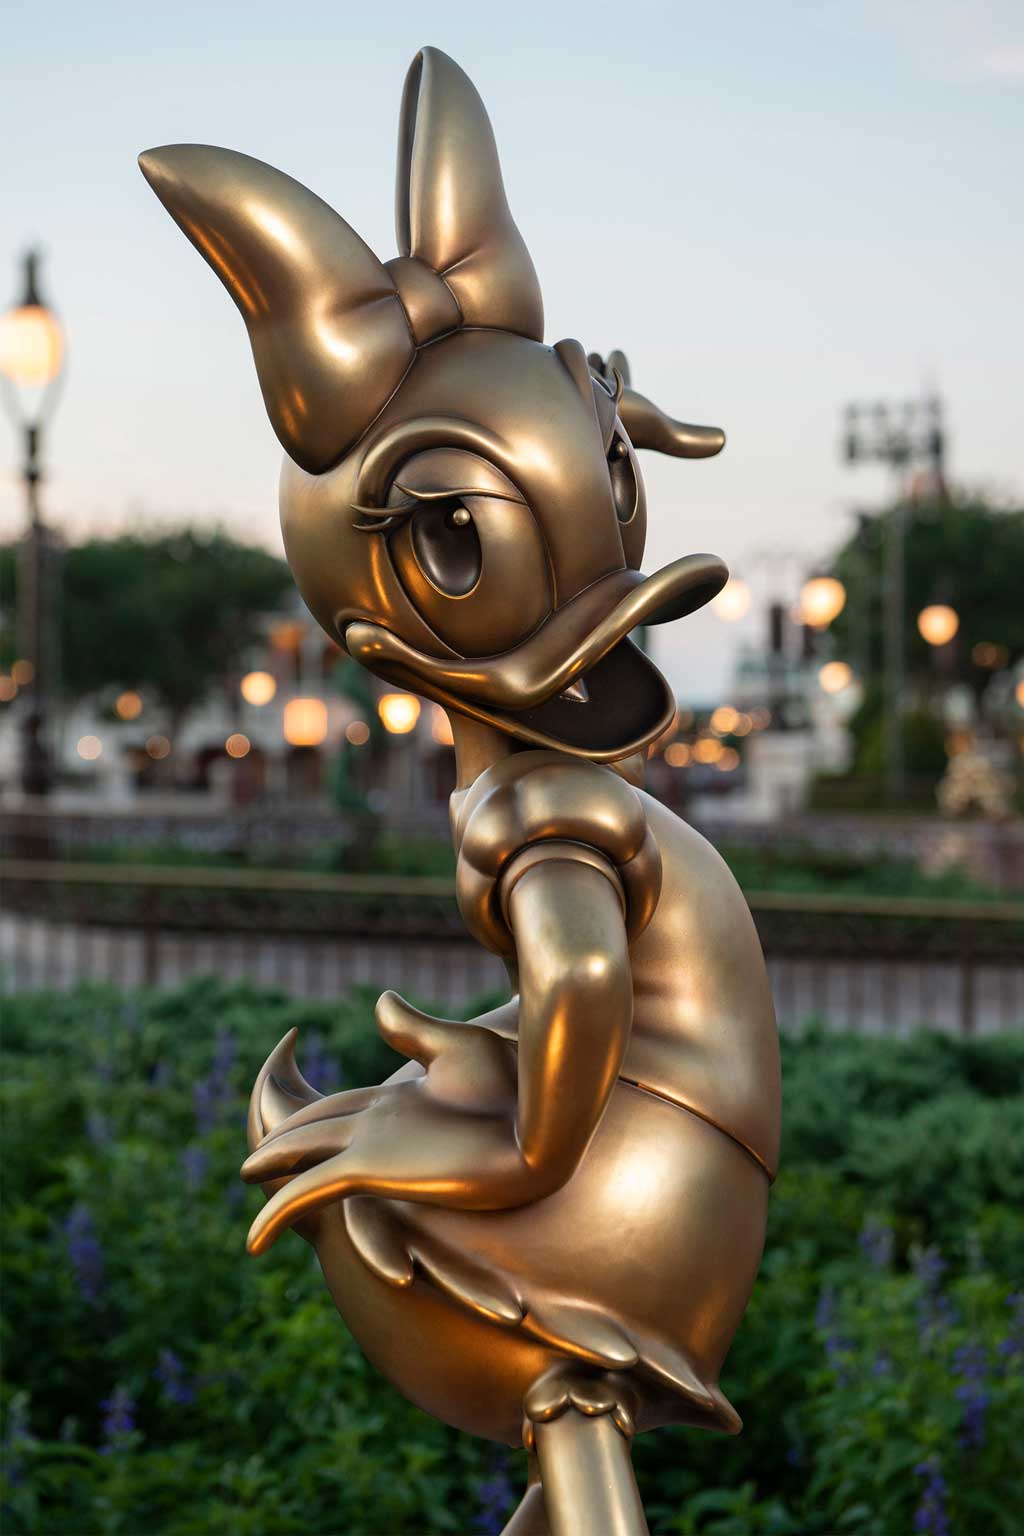 Daisy Duck at Magic Kingdom Park is one of the “Disney Fab 50” golden character sculptures appearing in all four Walt Disney World Resort theme parks in Lake Buena Vista, Fla., as part of “The World’s Most Magical Celebration,” beginning Oct. 1, 2021, in honor of the resort’s 50th anniversary. (David Roark, photographer)